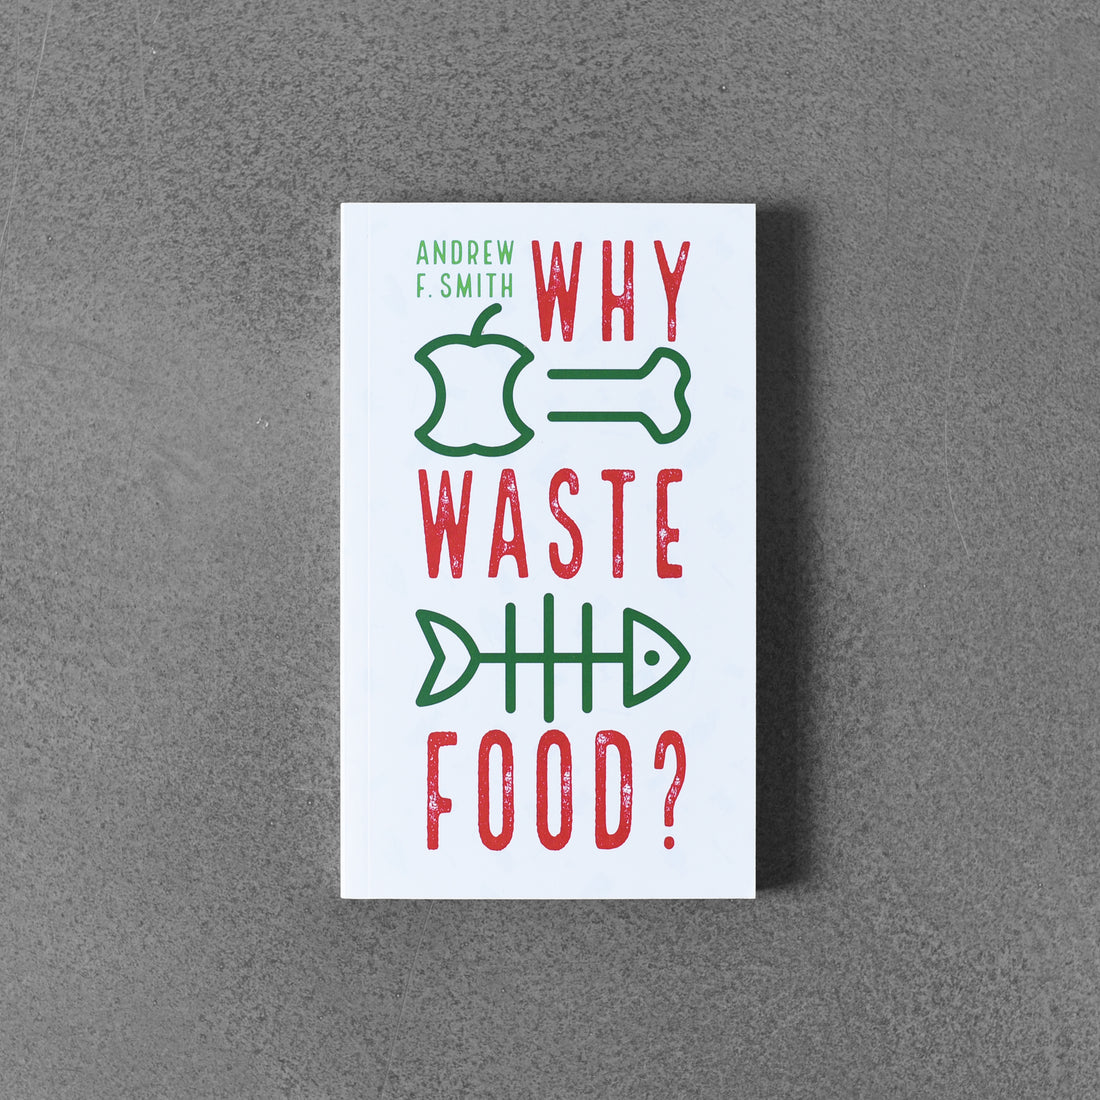 Why Waste Food - Andrew F. Smith